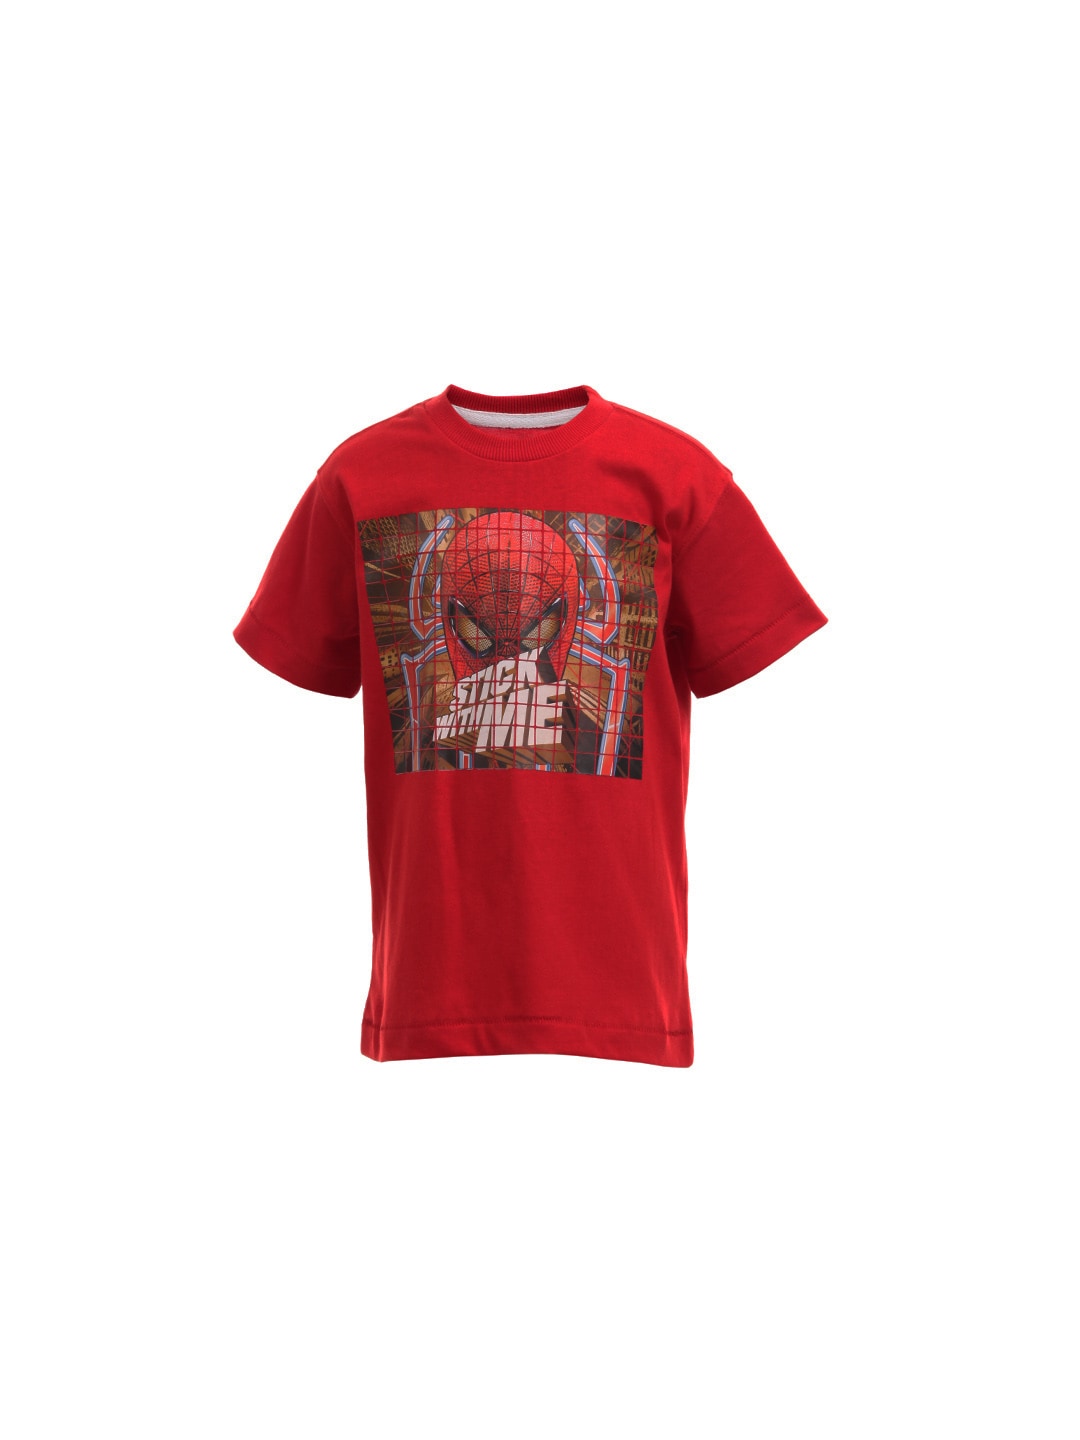 The Amazing Spiderman Boys Red T-shirt